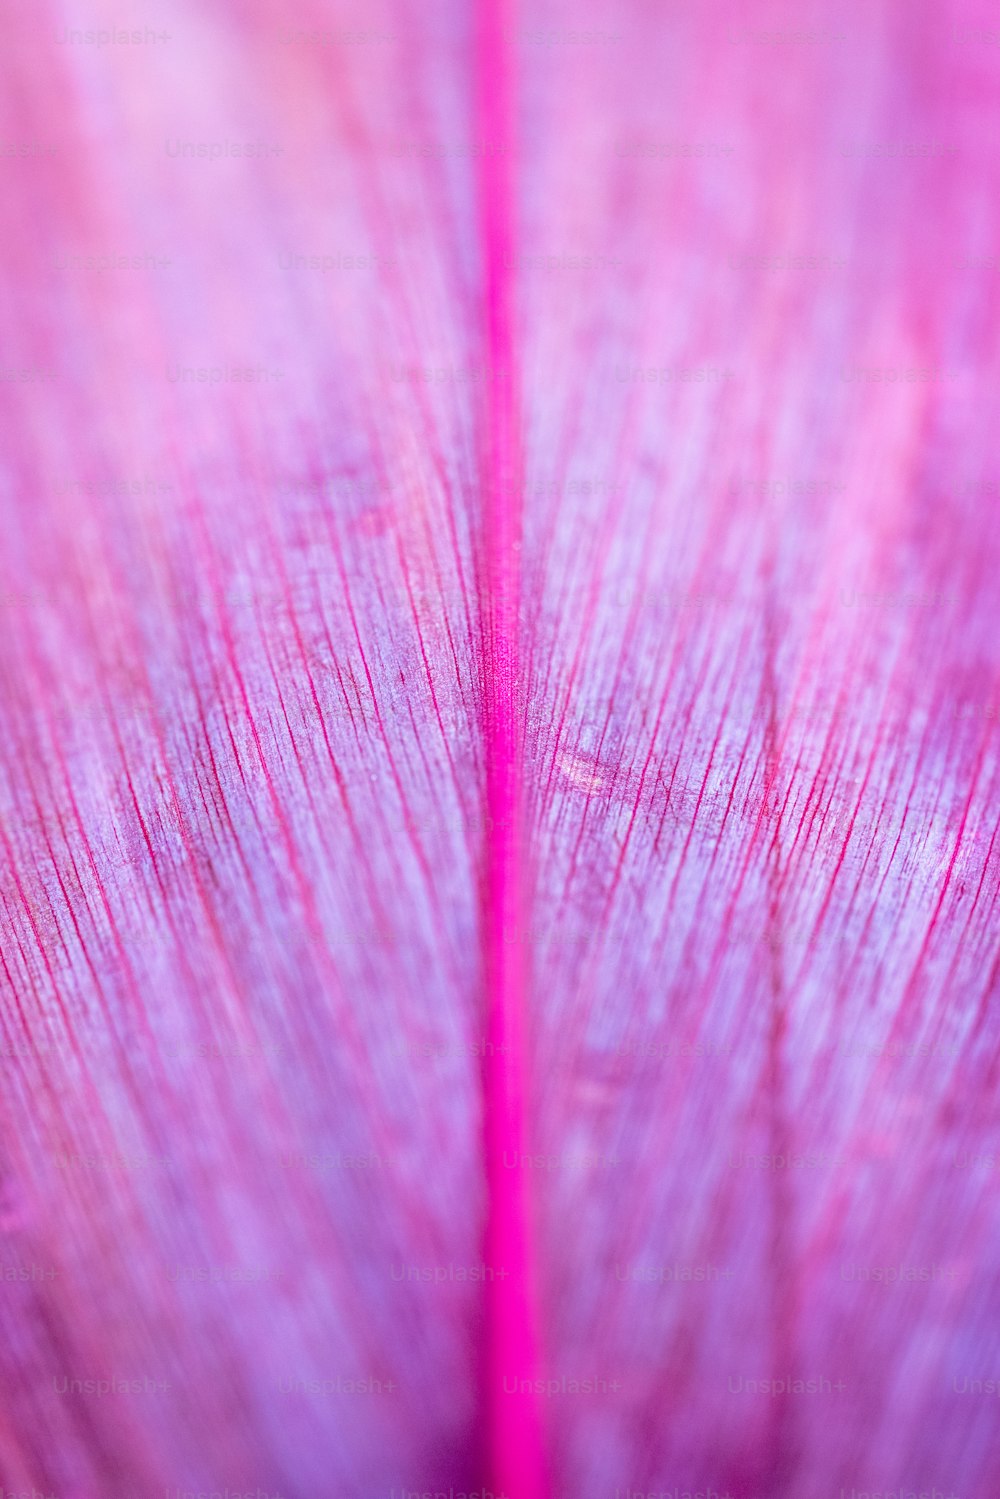 Pink Feather Pictures  Download Free Images on Unsplash